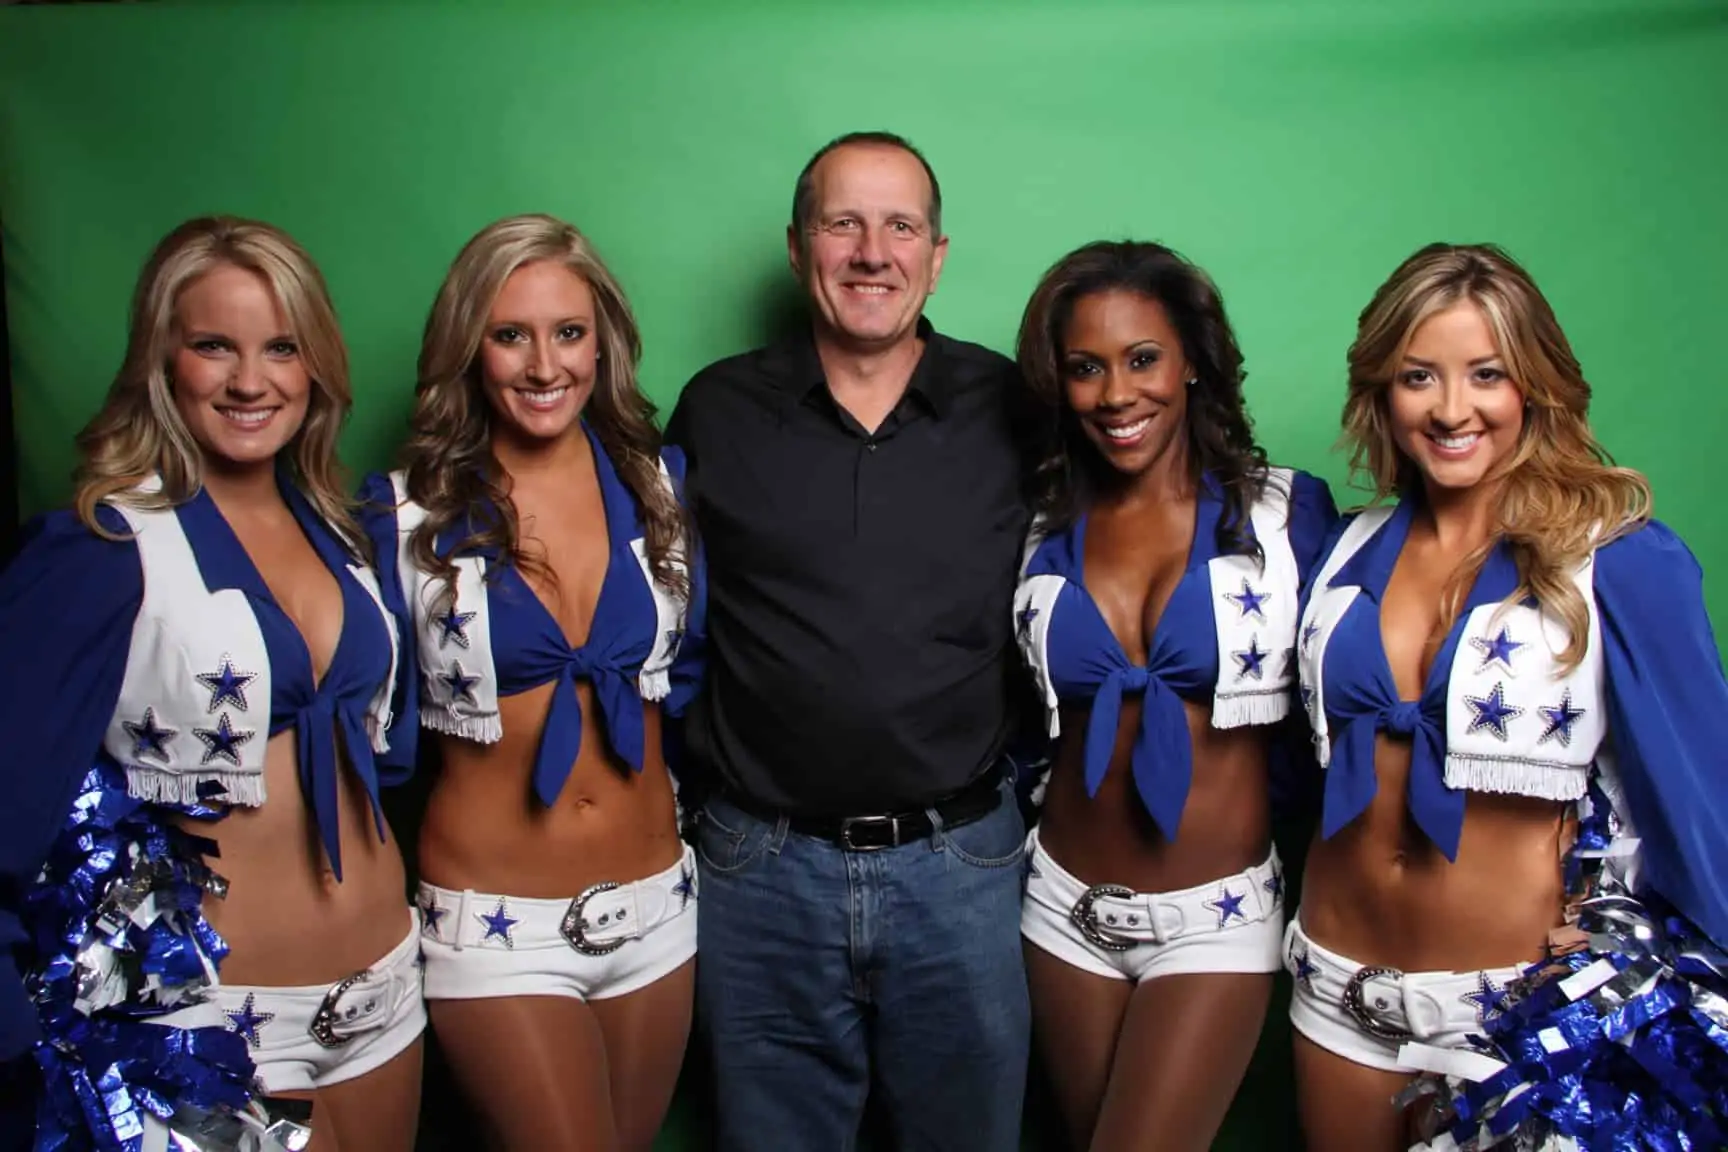 This corporate event was held at a hotel in Irving. The Dallas Cowboy Cheerleaders were hired to stand with guests at the green screen booth.